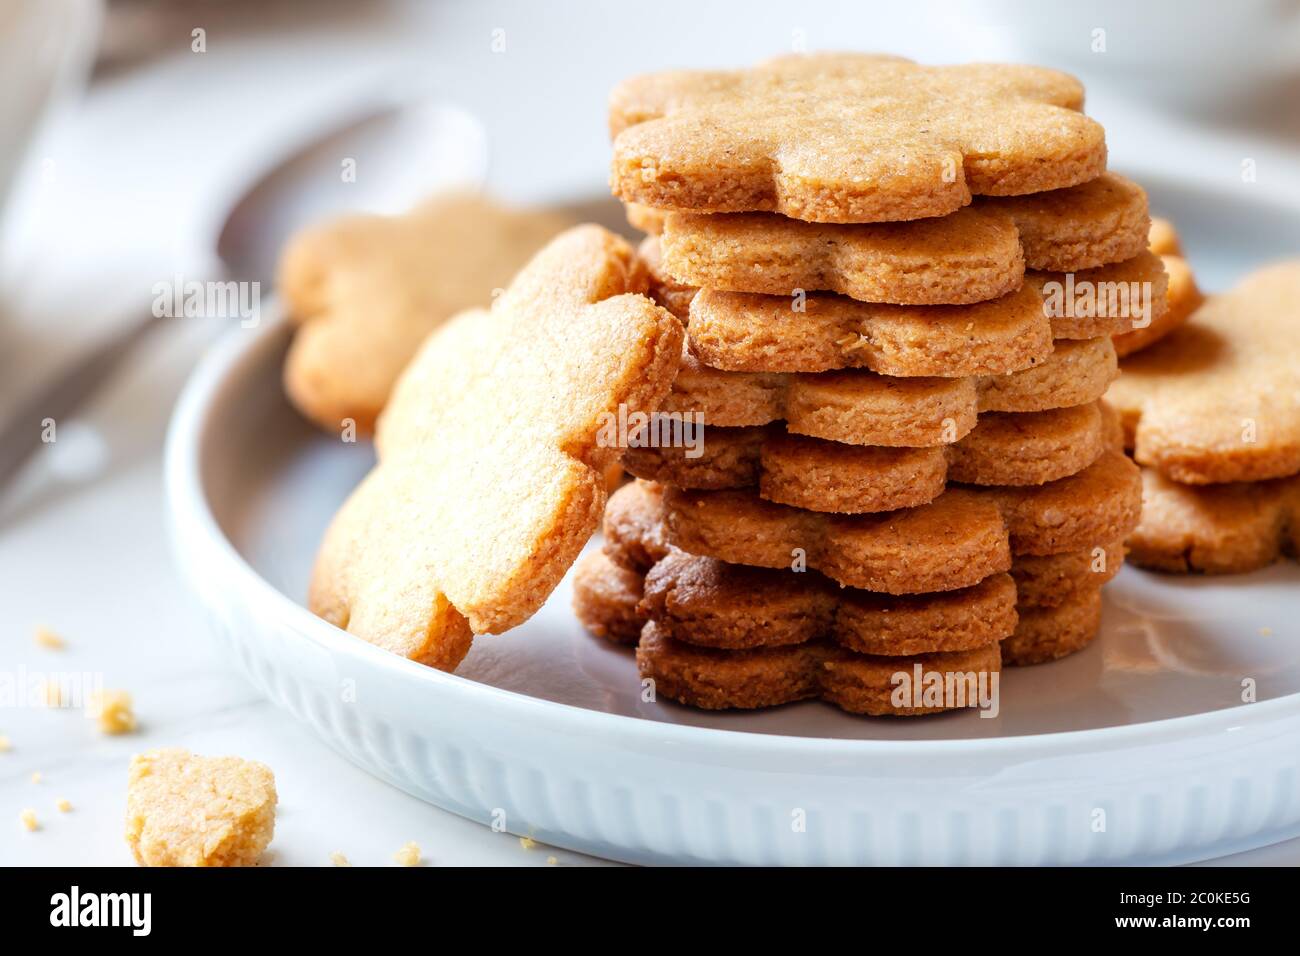 Freshly baked homemade cinnamon cookies stacked on a plate for breakfast as a Good Morning concept Stock Photo